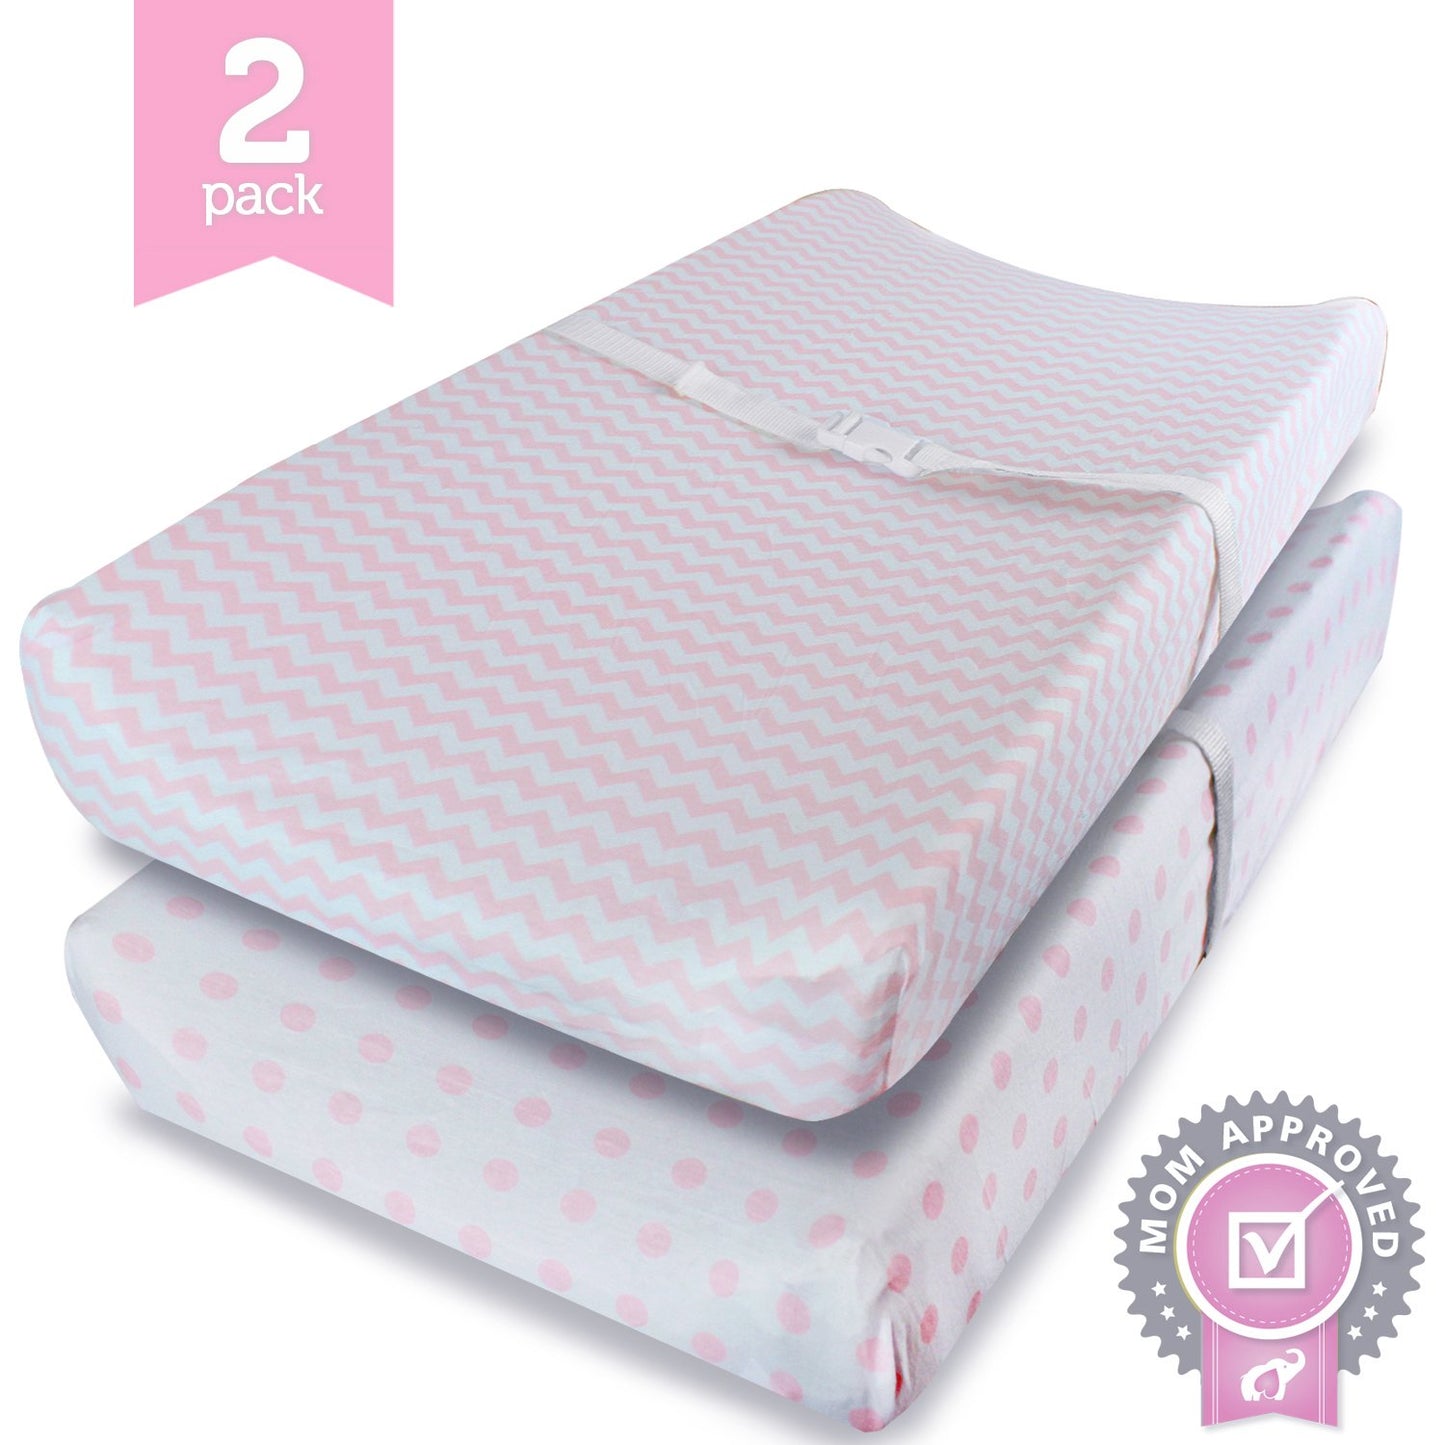 Changing Pad Covers, Cradle Bassinet Sheets Fitted Jersey Cotton (2 Pack) Pink, White